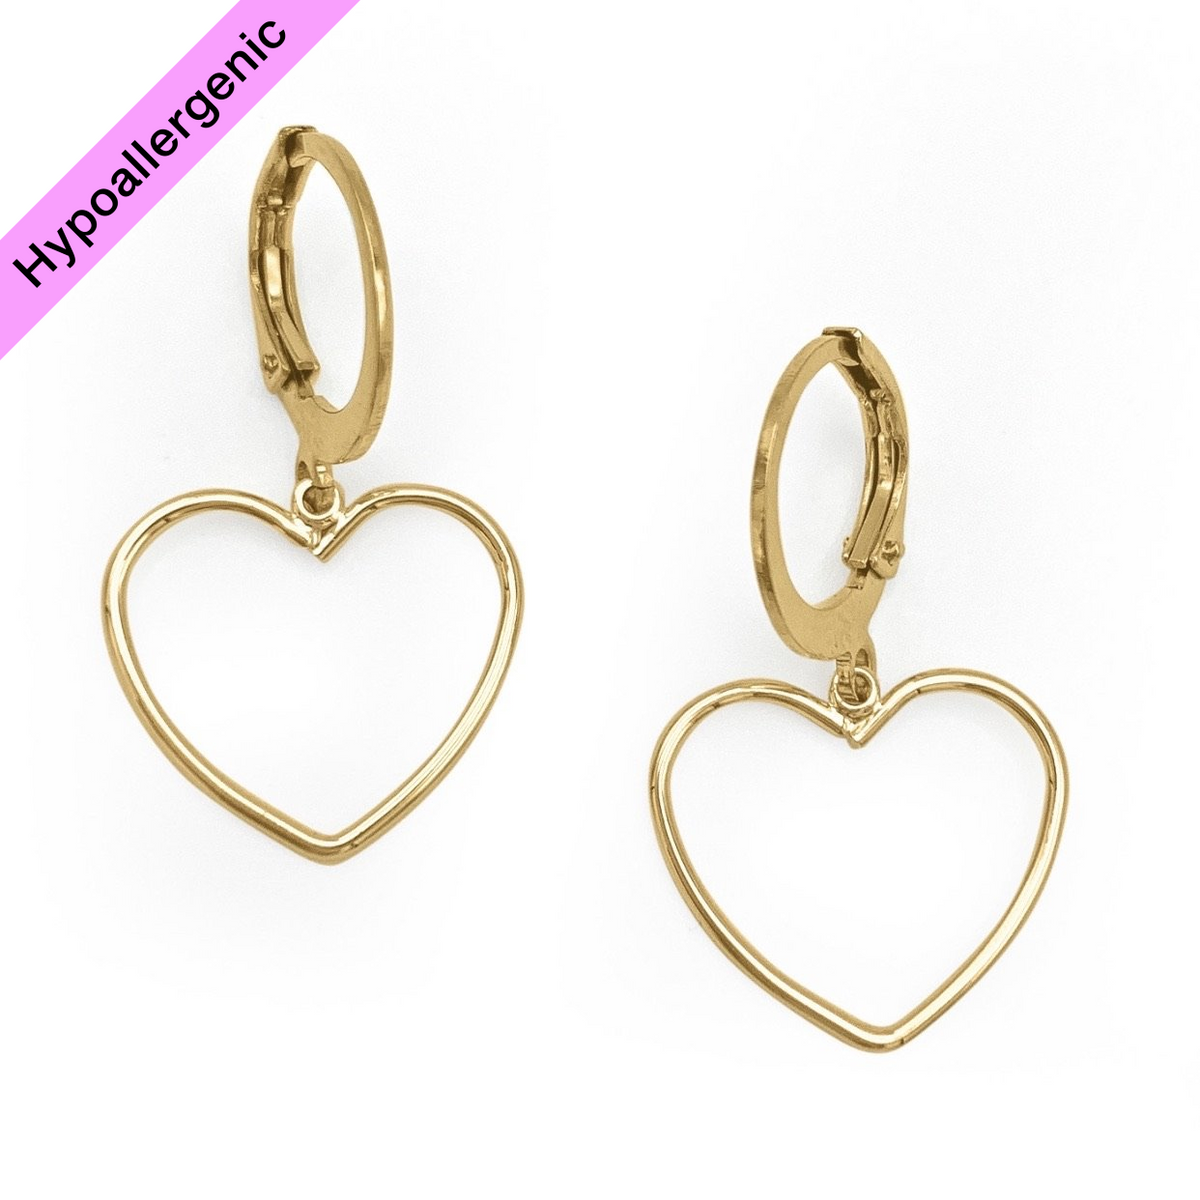 Love Don’t Cost A Thing Earrings (4452428873794)